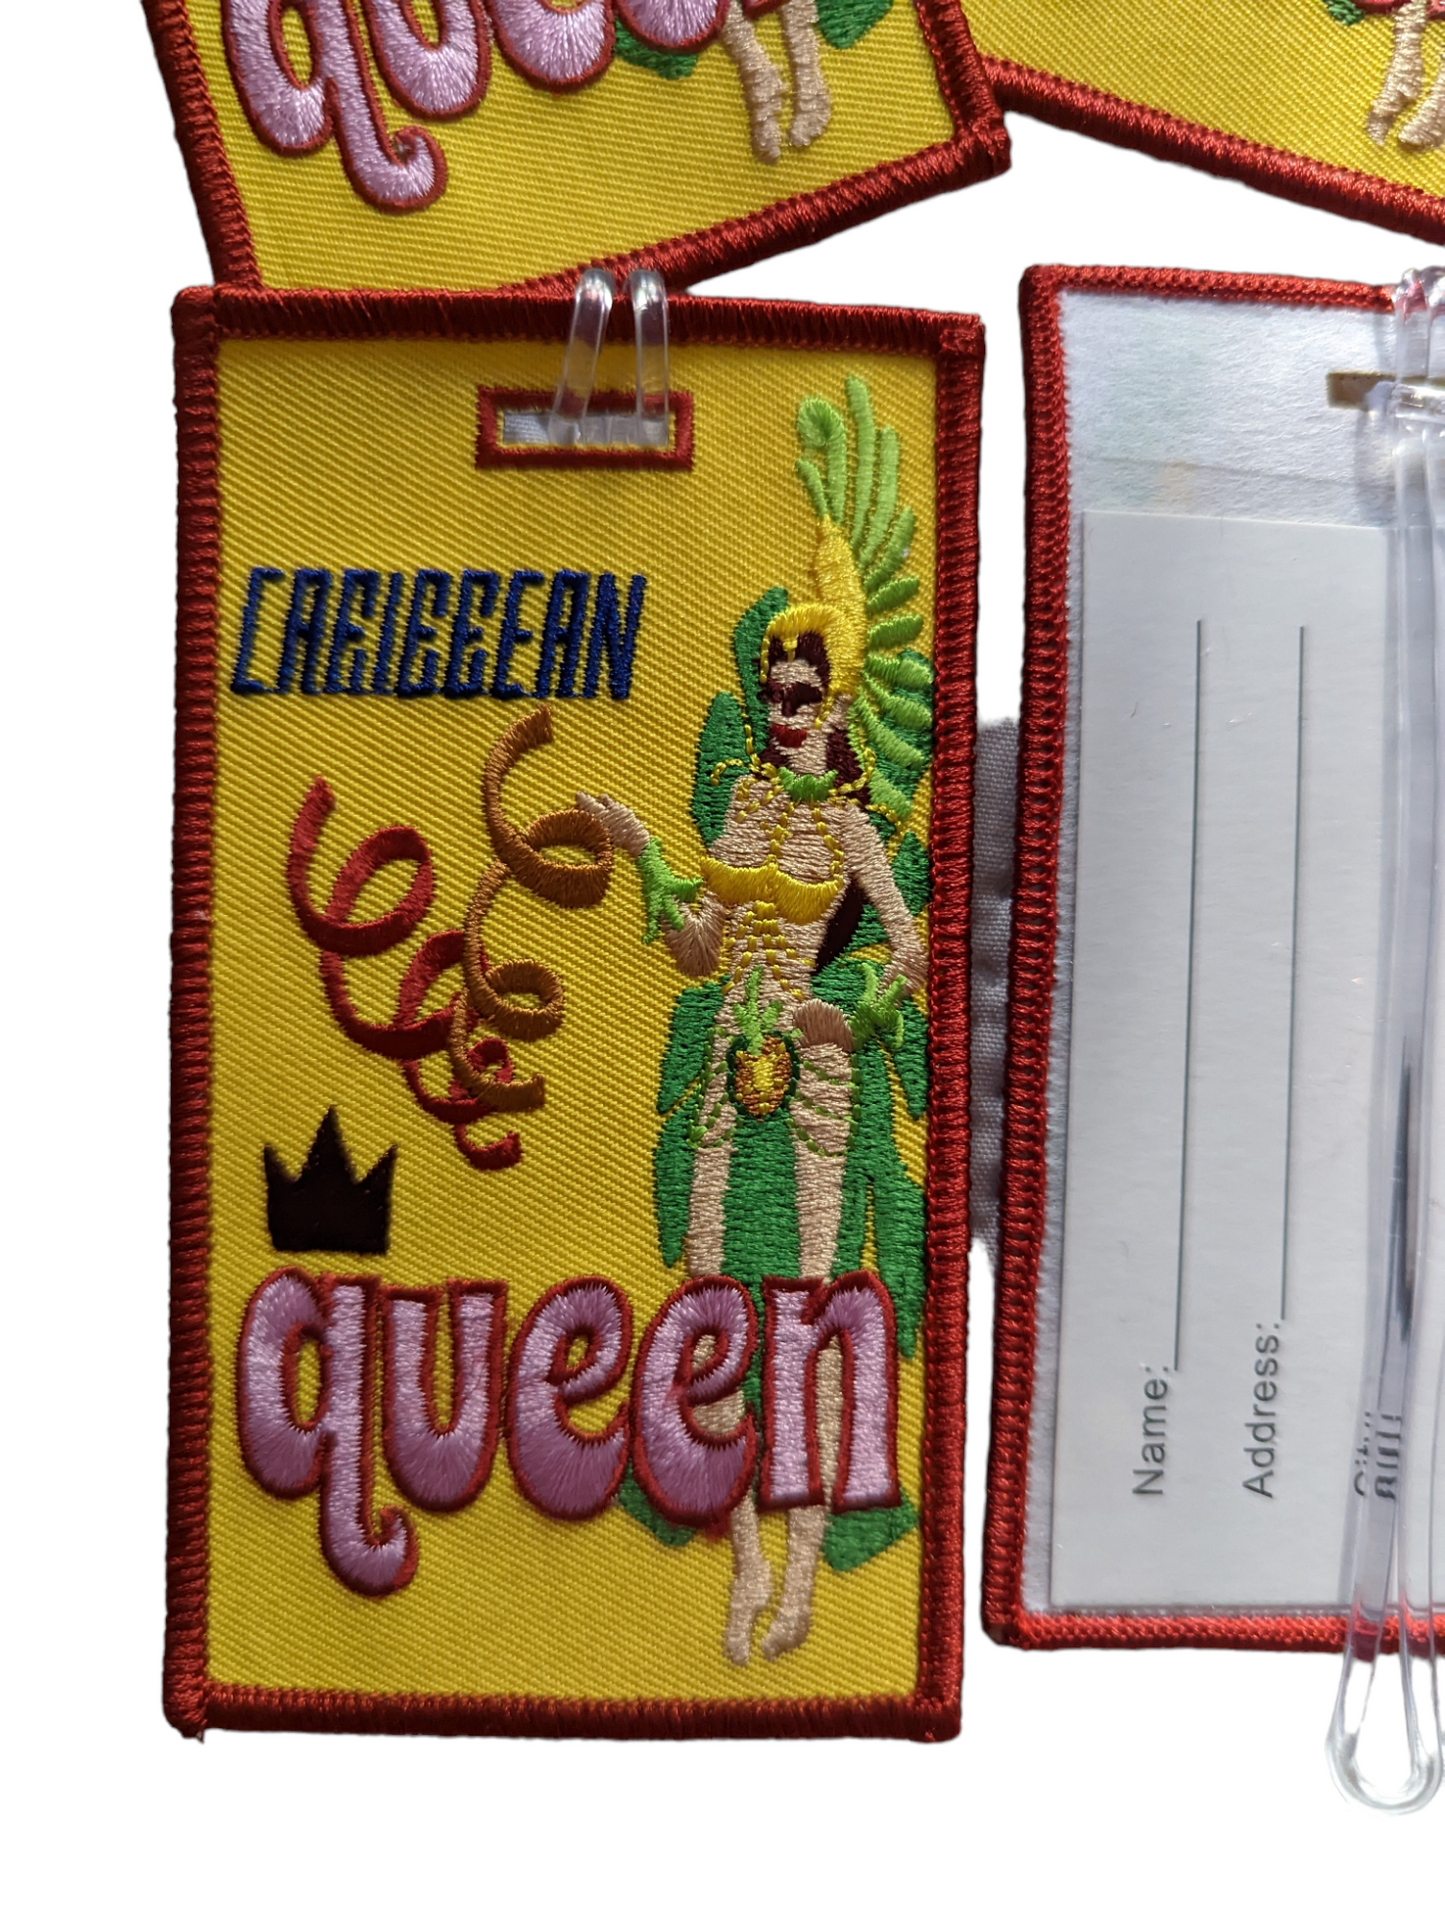 Caribbean Queen 👑 Luggage Tags